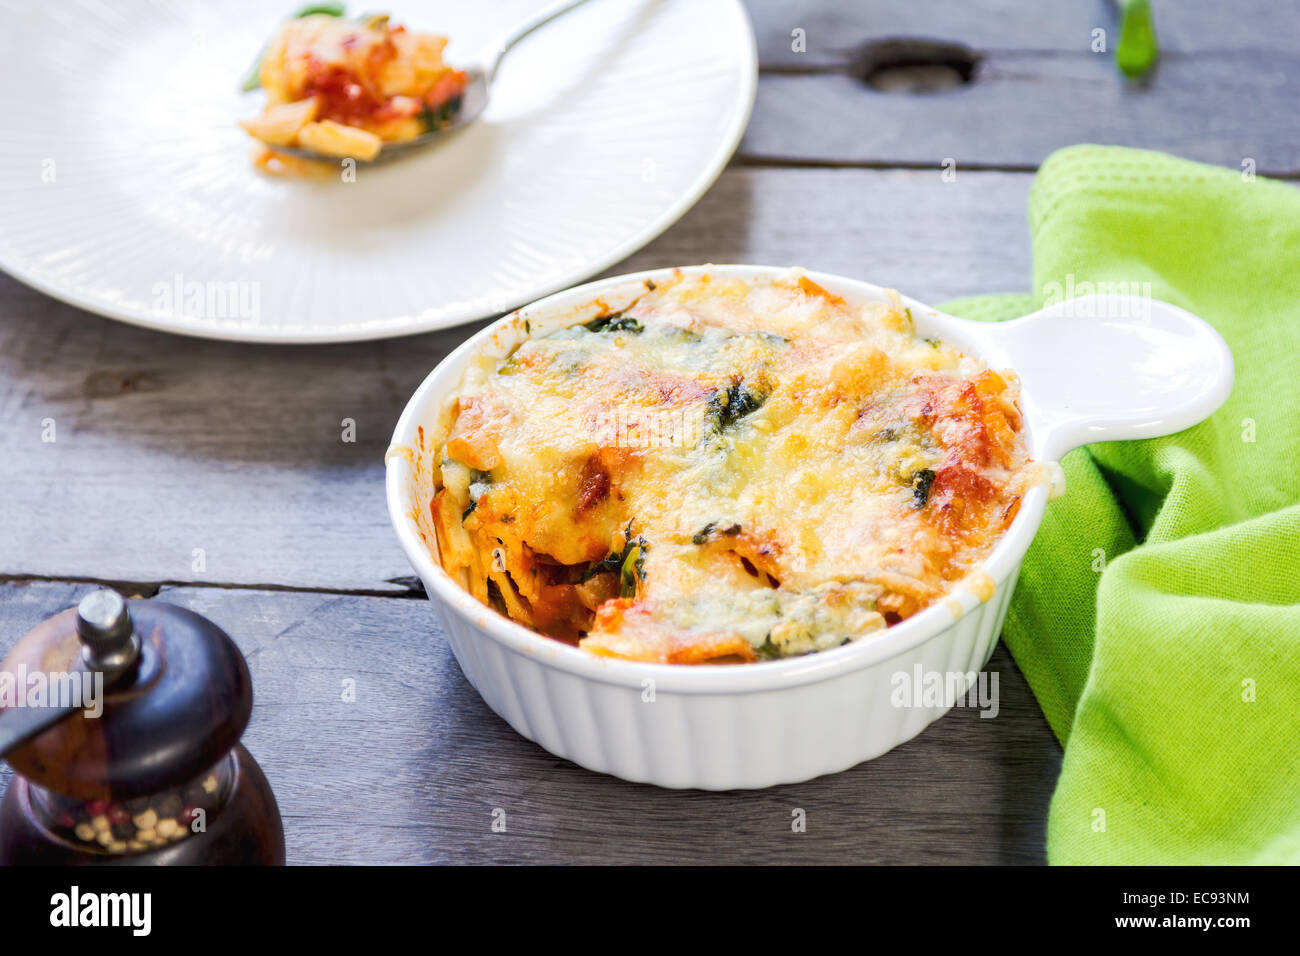 Baked Rigatoni with spinach in tomato sauce Stock Photo